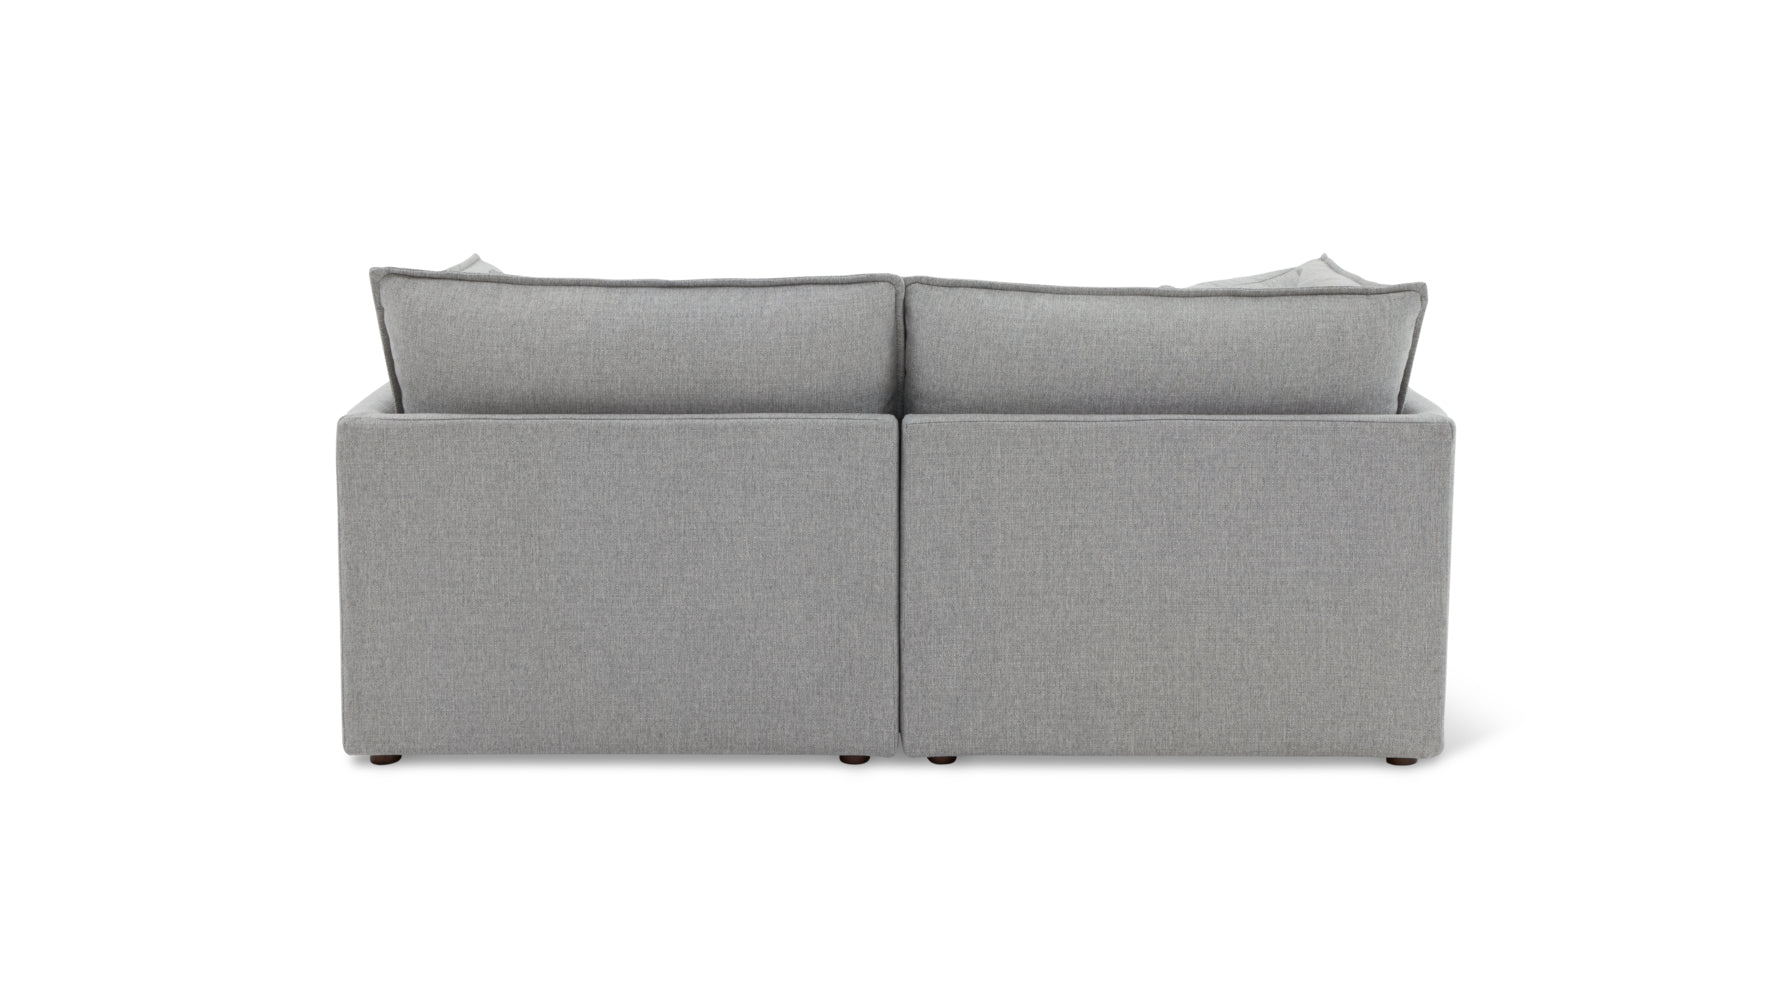 Chill Time 3-Piece Modular Sectional, Heather - Image 4